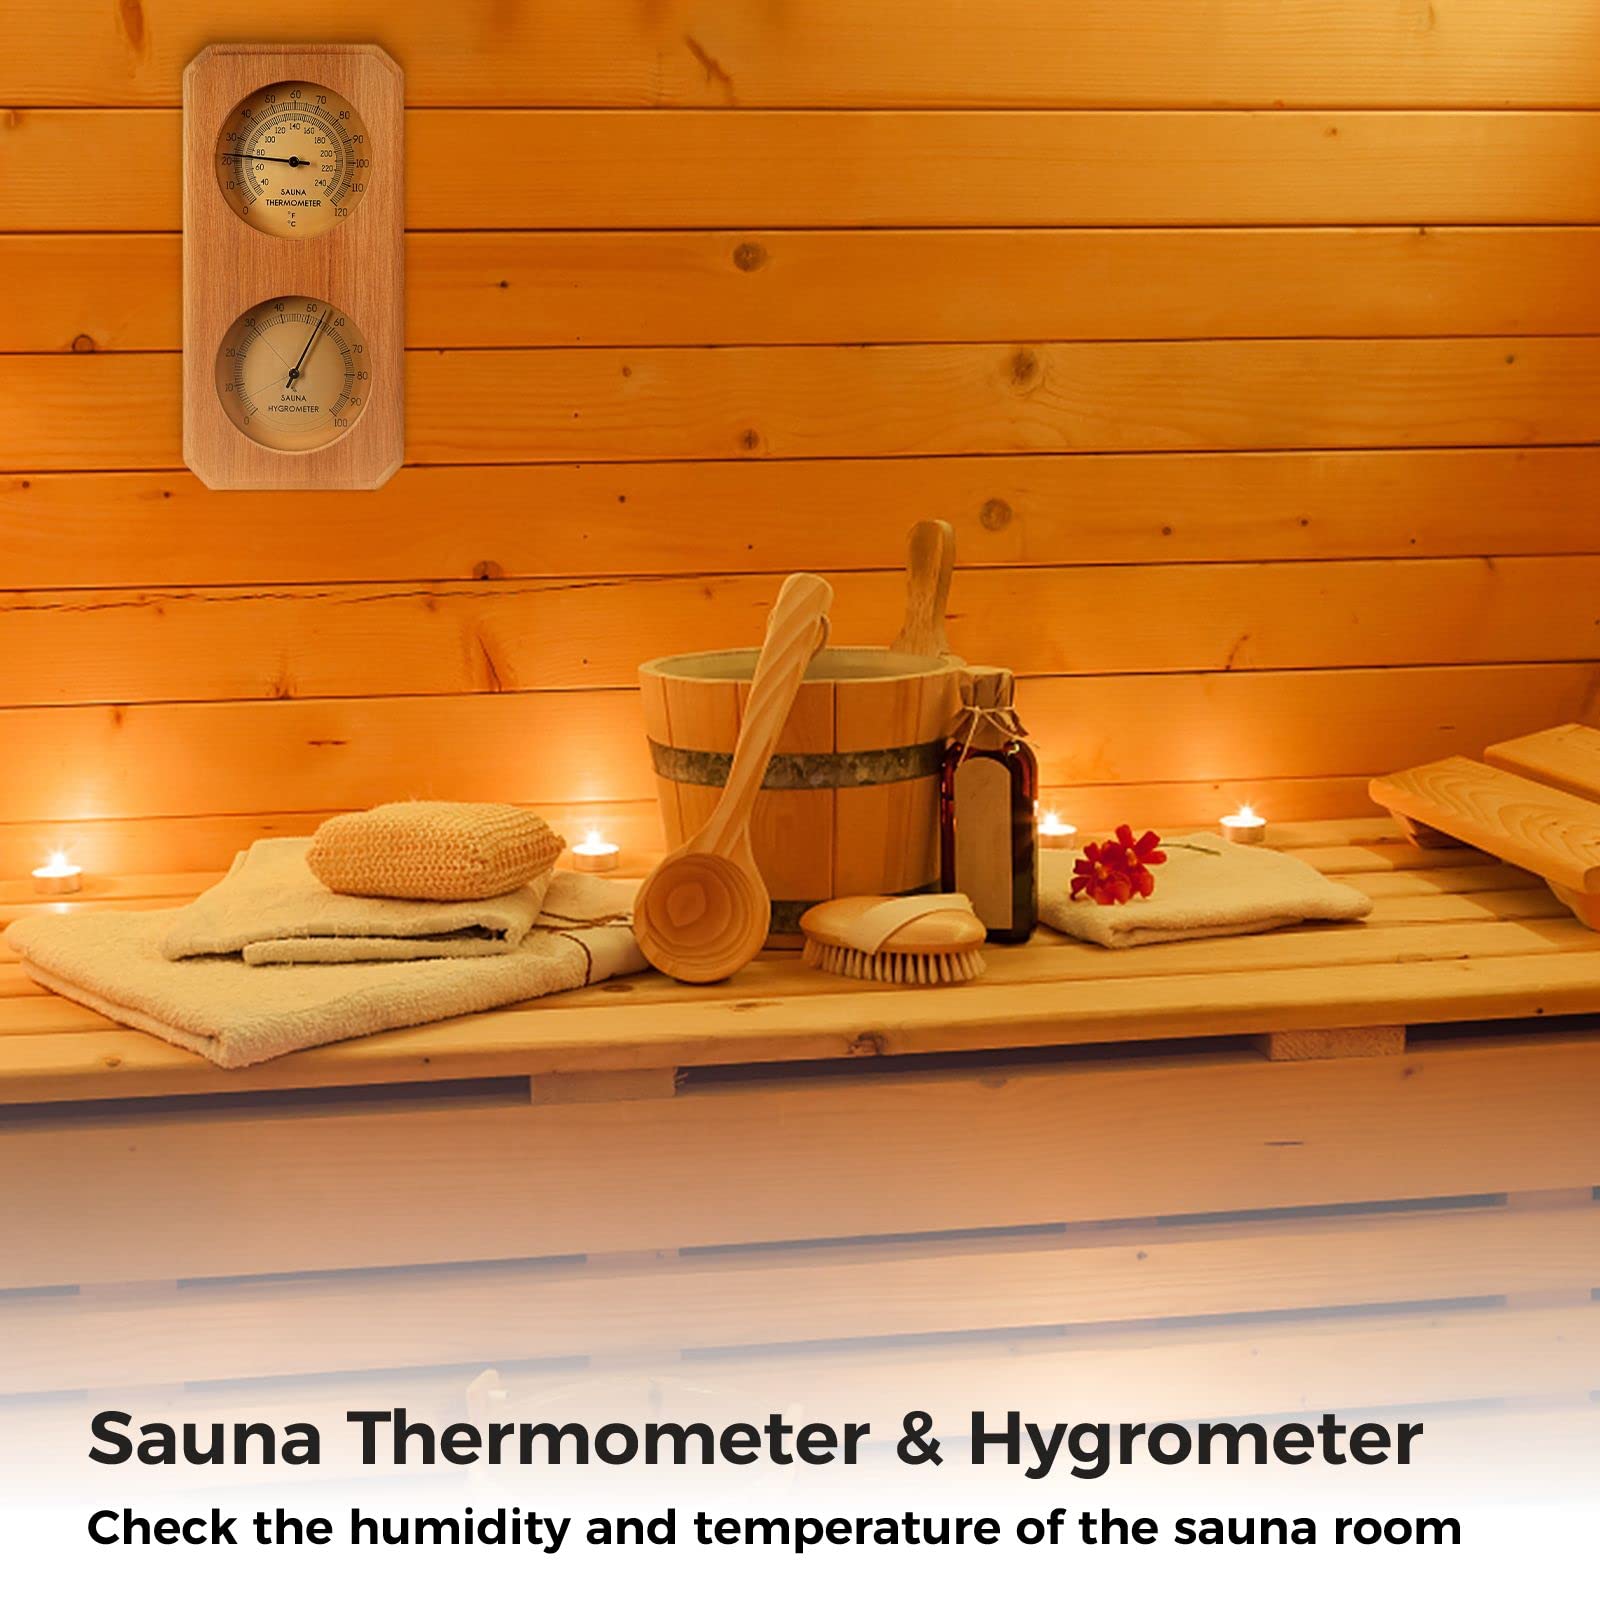 Homaisson 2 in 1 Sauna Thermometer and Hygrometer, Wooden Sauna Hygrothermograph Indoor Humidity Temperature Measurement for Sauna Room Accessories-10 x 5’’